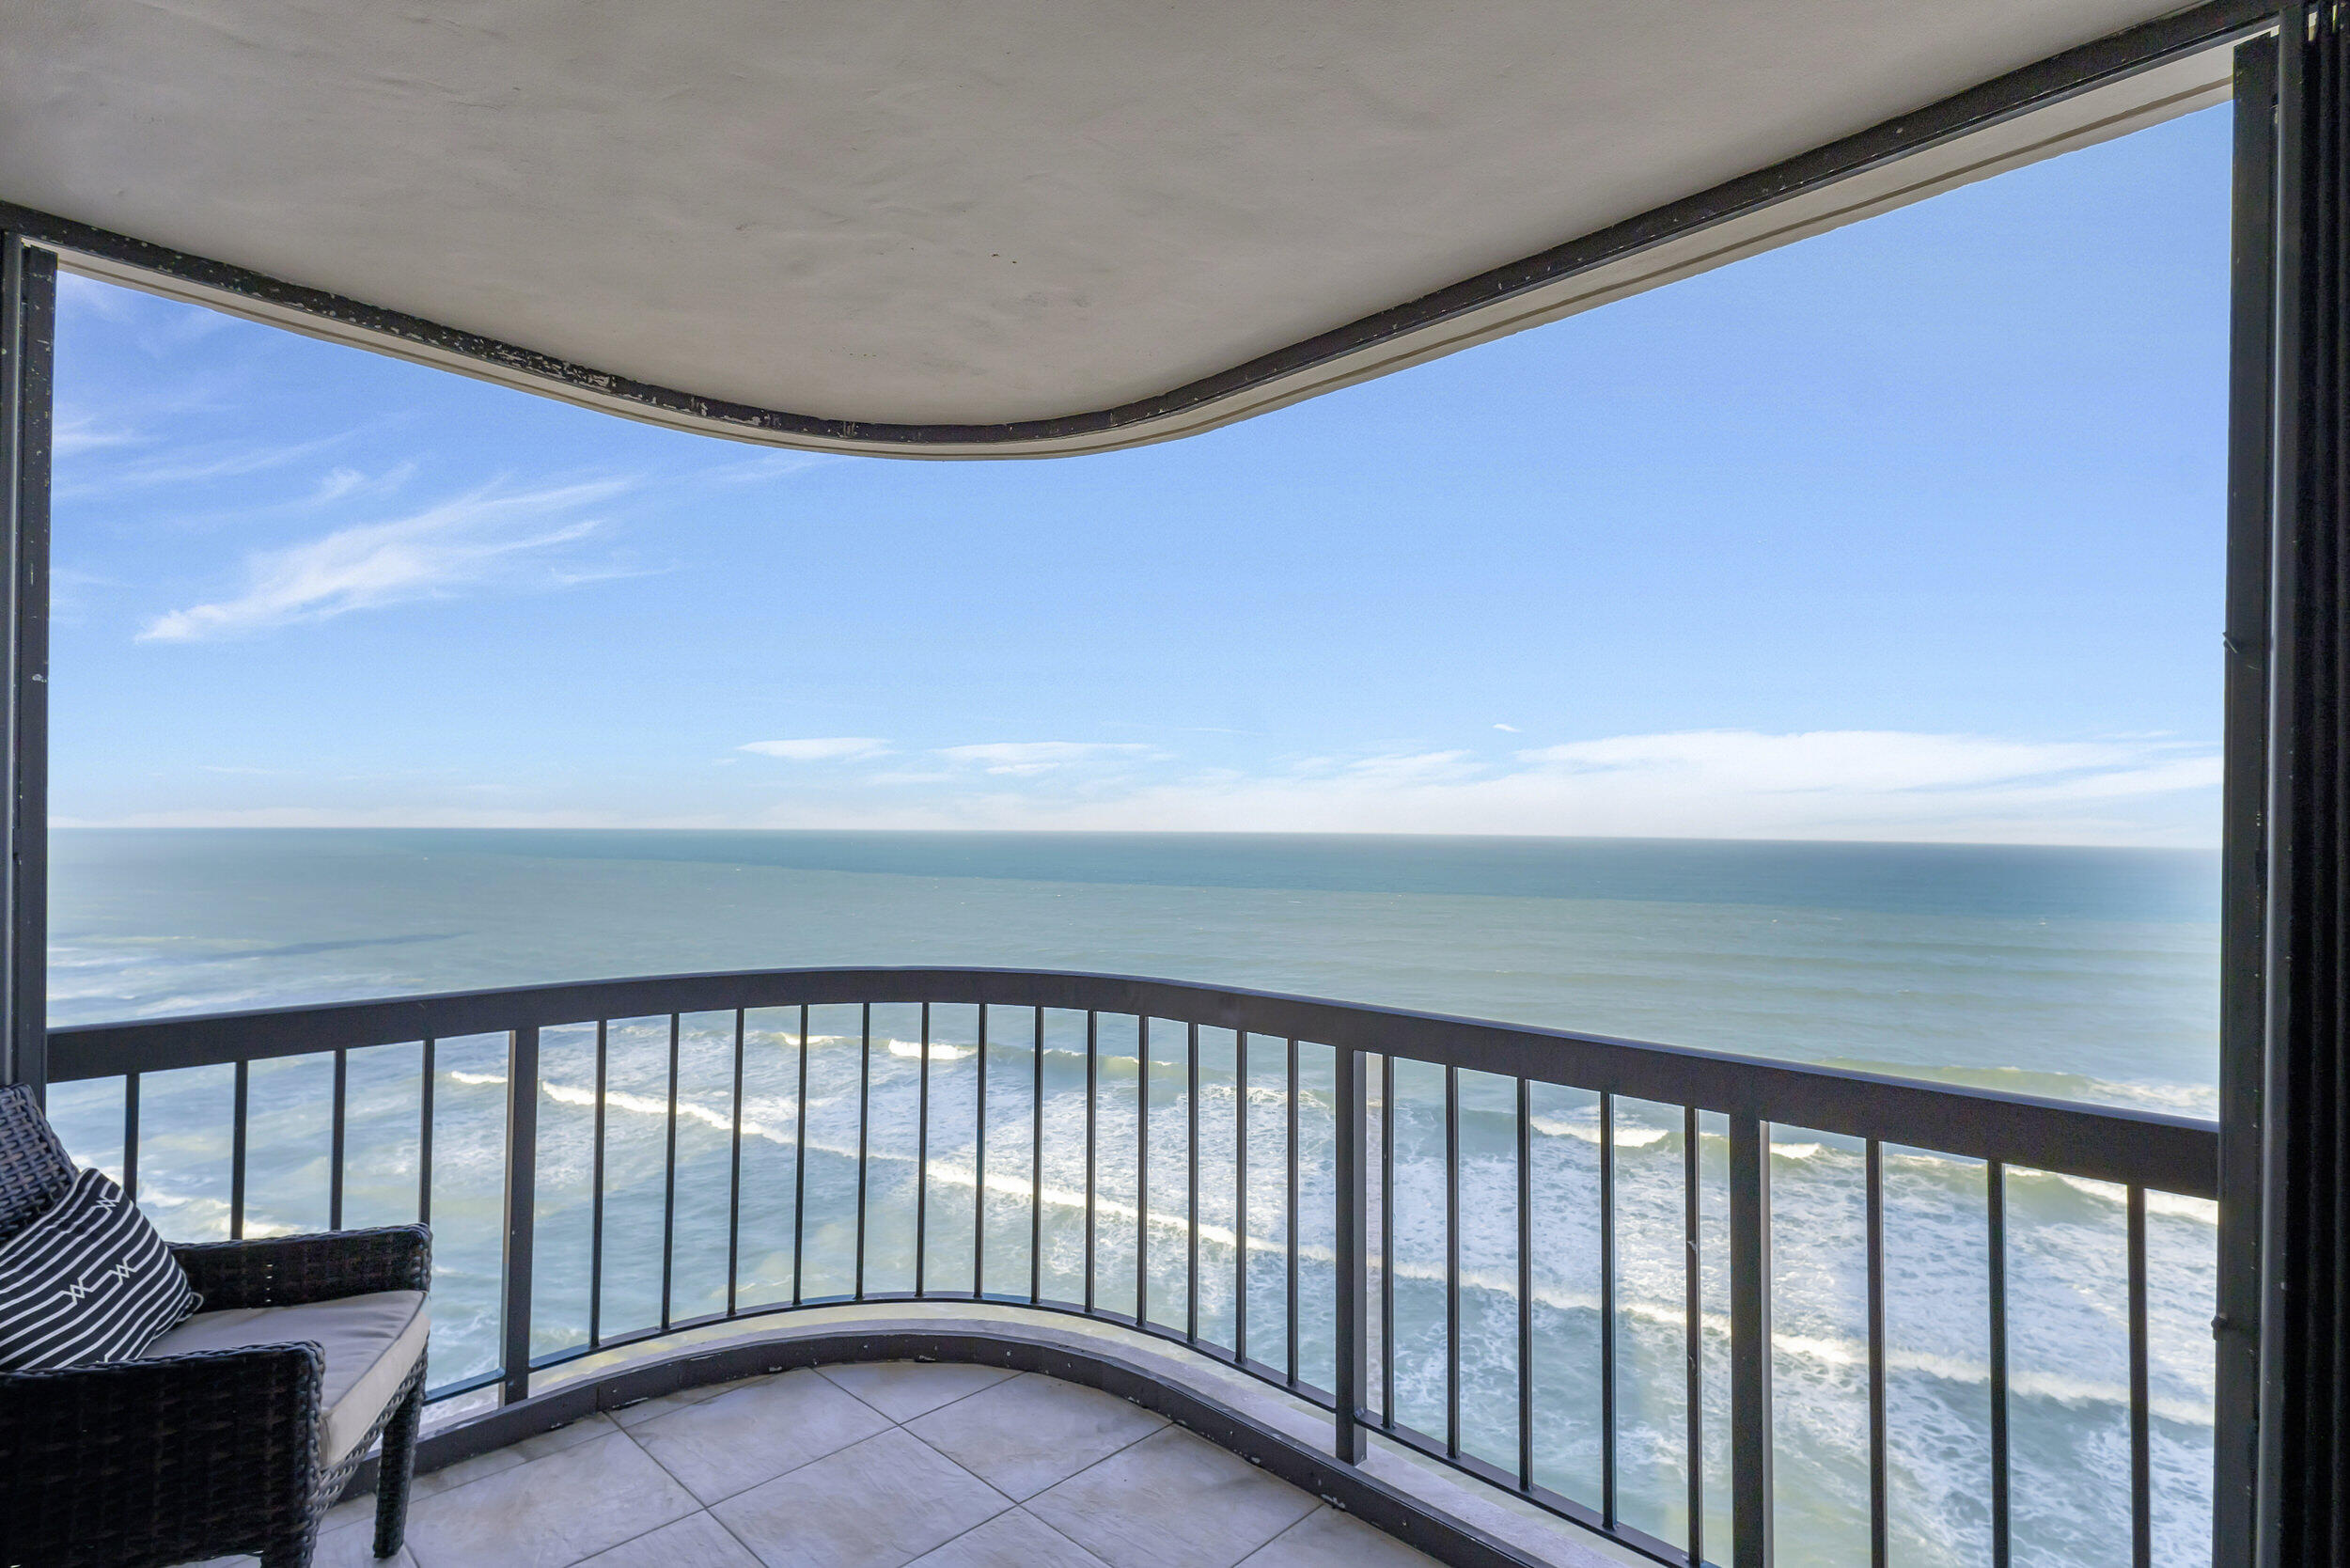 THE MOST GORGEOUS VIEW OF THE BLUE ATLANTIC OCEAN  FROM BOTH OF YOUR WRAP AROUND BALCONIES  DIRECTLY OVER THE OCEAN.1 BALCONY FACES SE AND THE OTHER FACES NE. FLOOR TO  CEILING IMPACT WINDOWS, UPGRADED KITCHEN WITH ELEGANT FINE WOOD CABINETRY, AND 3 UPGRADED BATHROOMS MAKES THIS  3 BEDROOM 3 BATHROOM UNIT 1 OF A KIND.WASHER AND DRYER IN UNIT. GARAGE PARKING,HEATED POOL,JACUZZI , BBQ AREA, STATE OF THE ART FITNESS CENTER, HIS AND HERS SAUNA, BILLIARD ROOM, 24 HOUR CONCIERGE SERVICE, MANED SECURITY GUARD GATE, LIBRARY,  OCEAN LOUNGE WITH FULL KITCHEN, AND MOST IMPORTANT 700 FEET OF SANDY BEACH AT YOUR FOOTSTEPS.